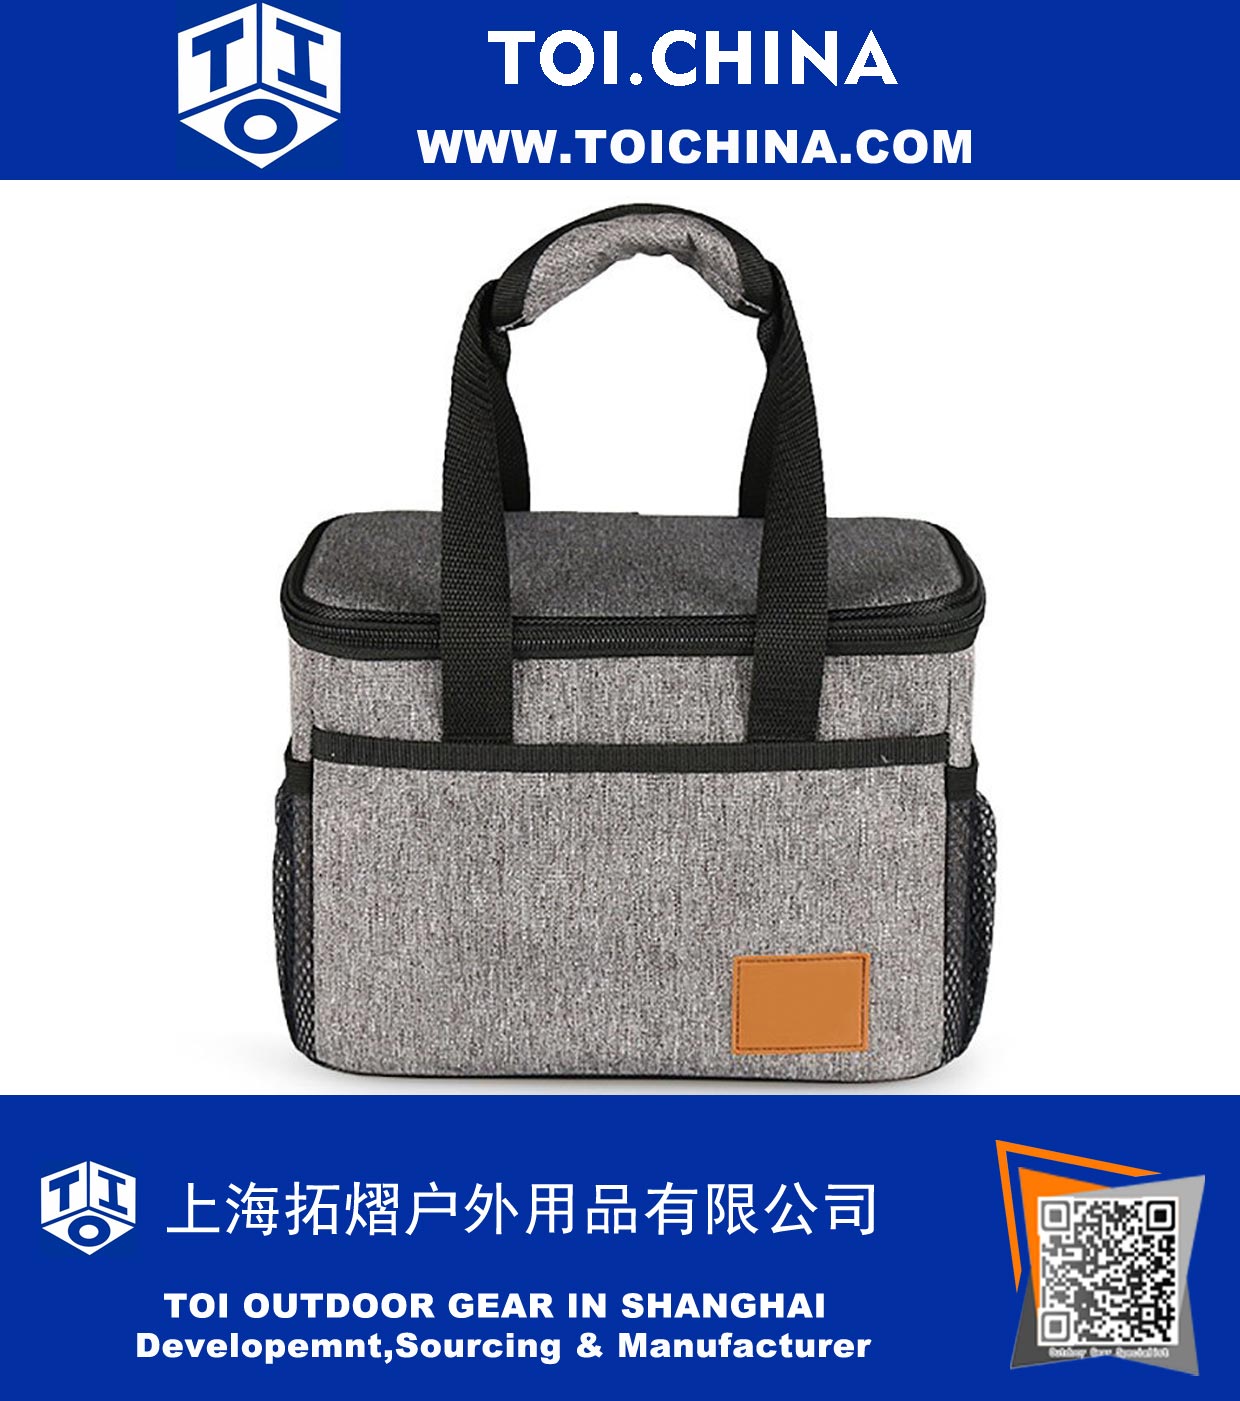 Ice Pack Portable Coolers Bag - Soft Waterproof Insulated Material Organizer Heather Grey Tote 6L